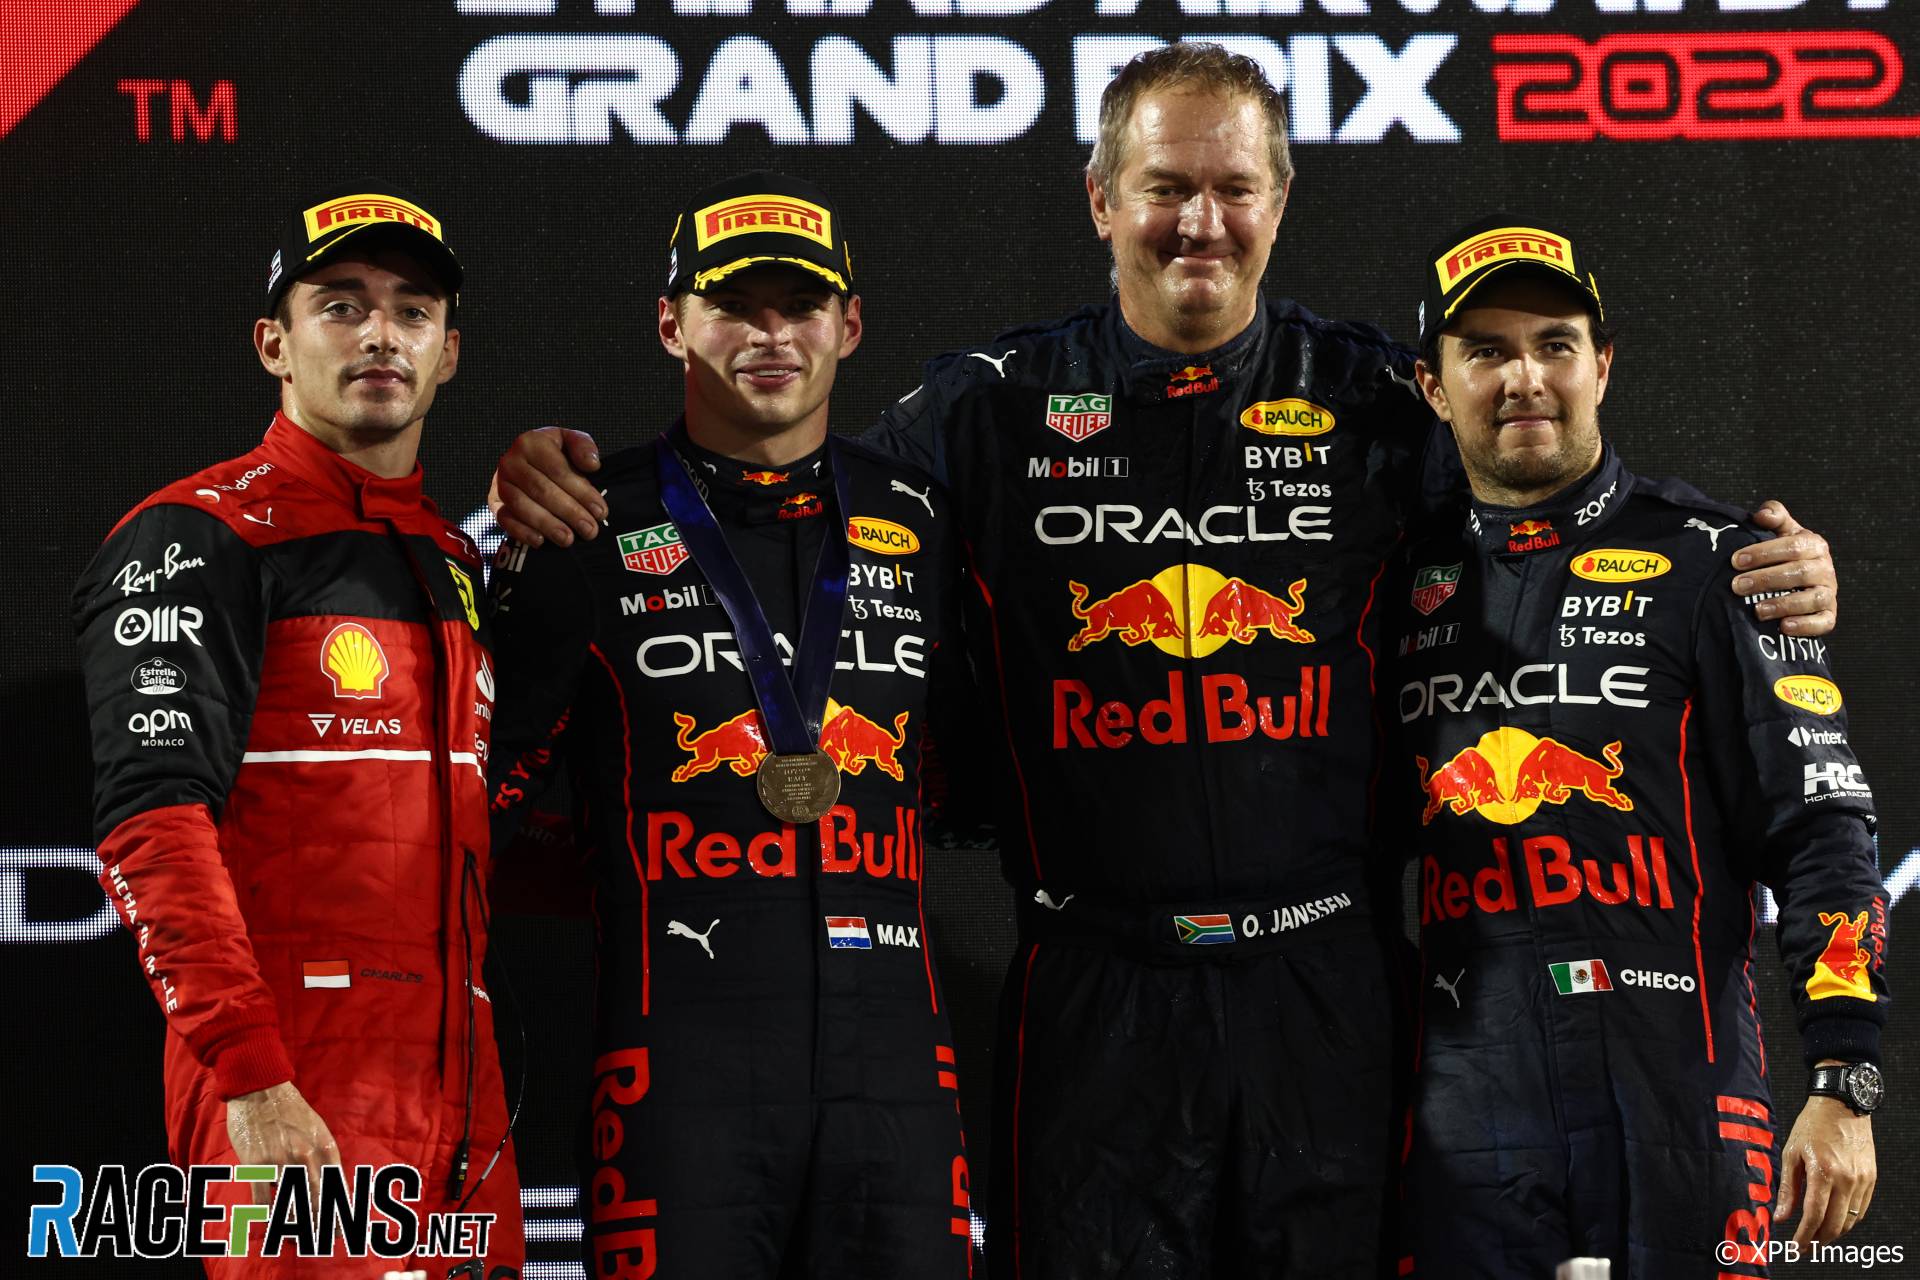 The Podium : Second Place Charles Leclerc (Scuderia Ferrari), Race Winner Max Verstappen (Red Bull Racing) and Third Place Sergio Pérez (Red Bull Racing)